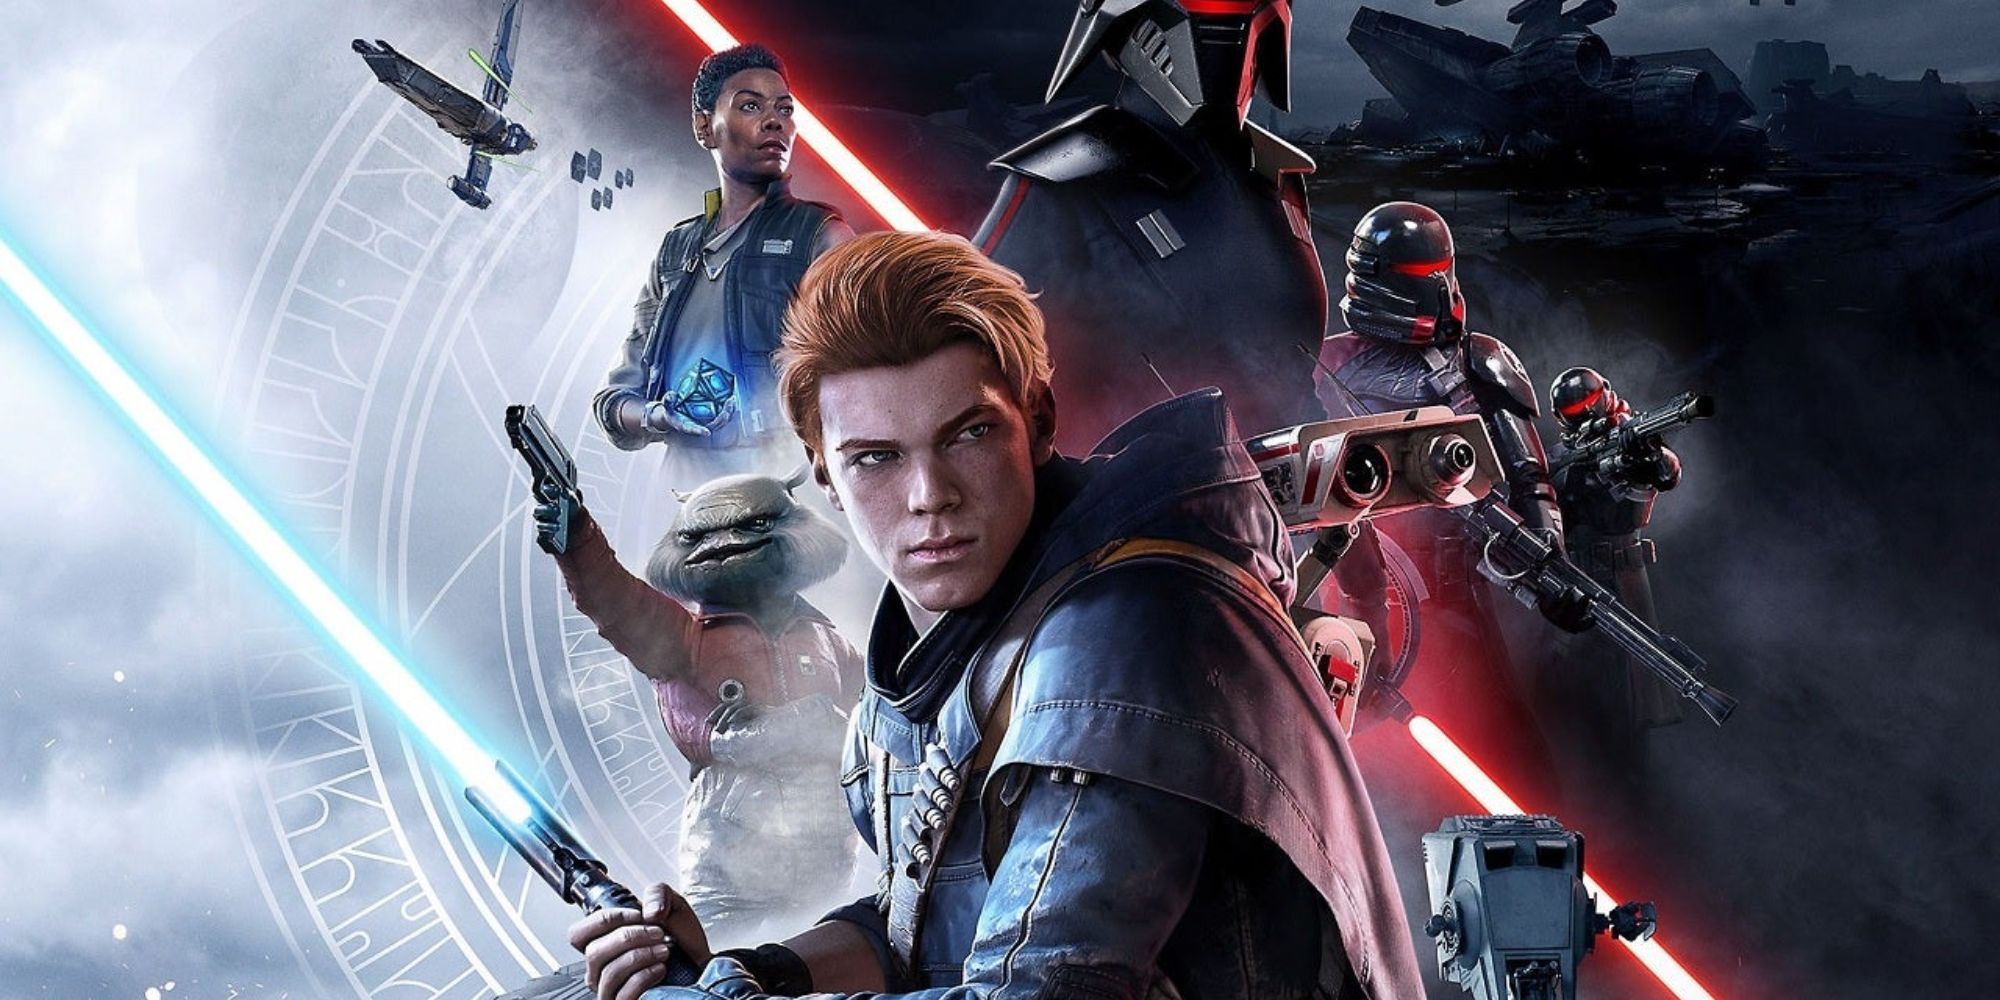 Star Wars Jedi Fallen Order Cal is central with other characters behind him in a poster-style image